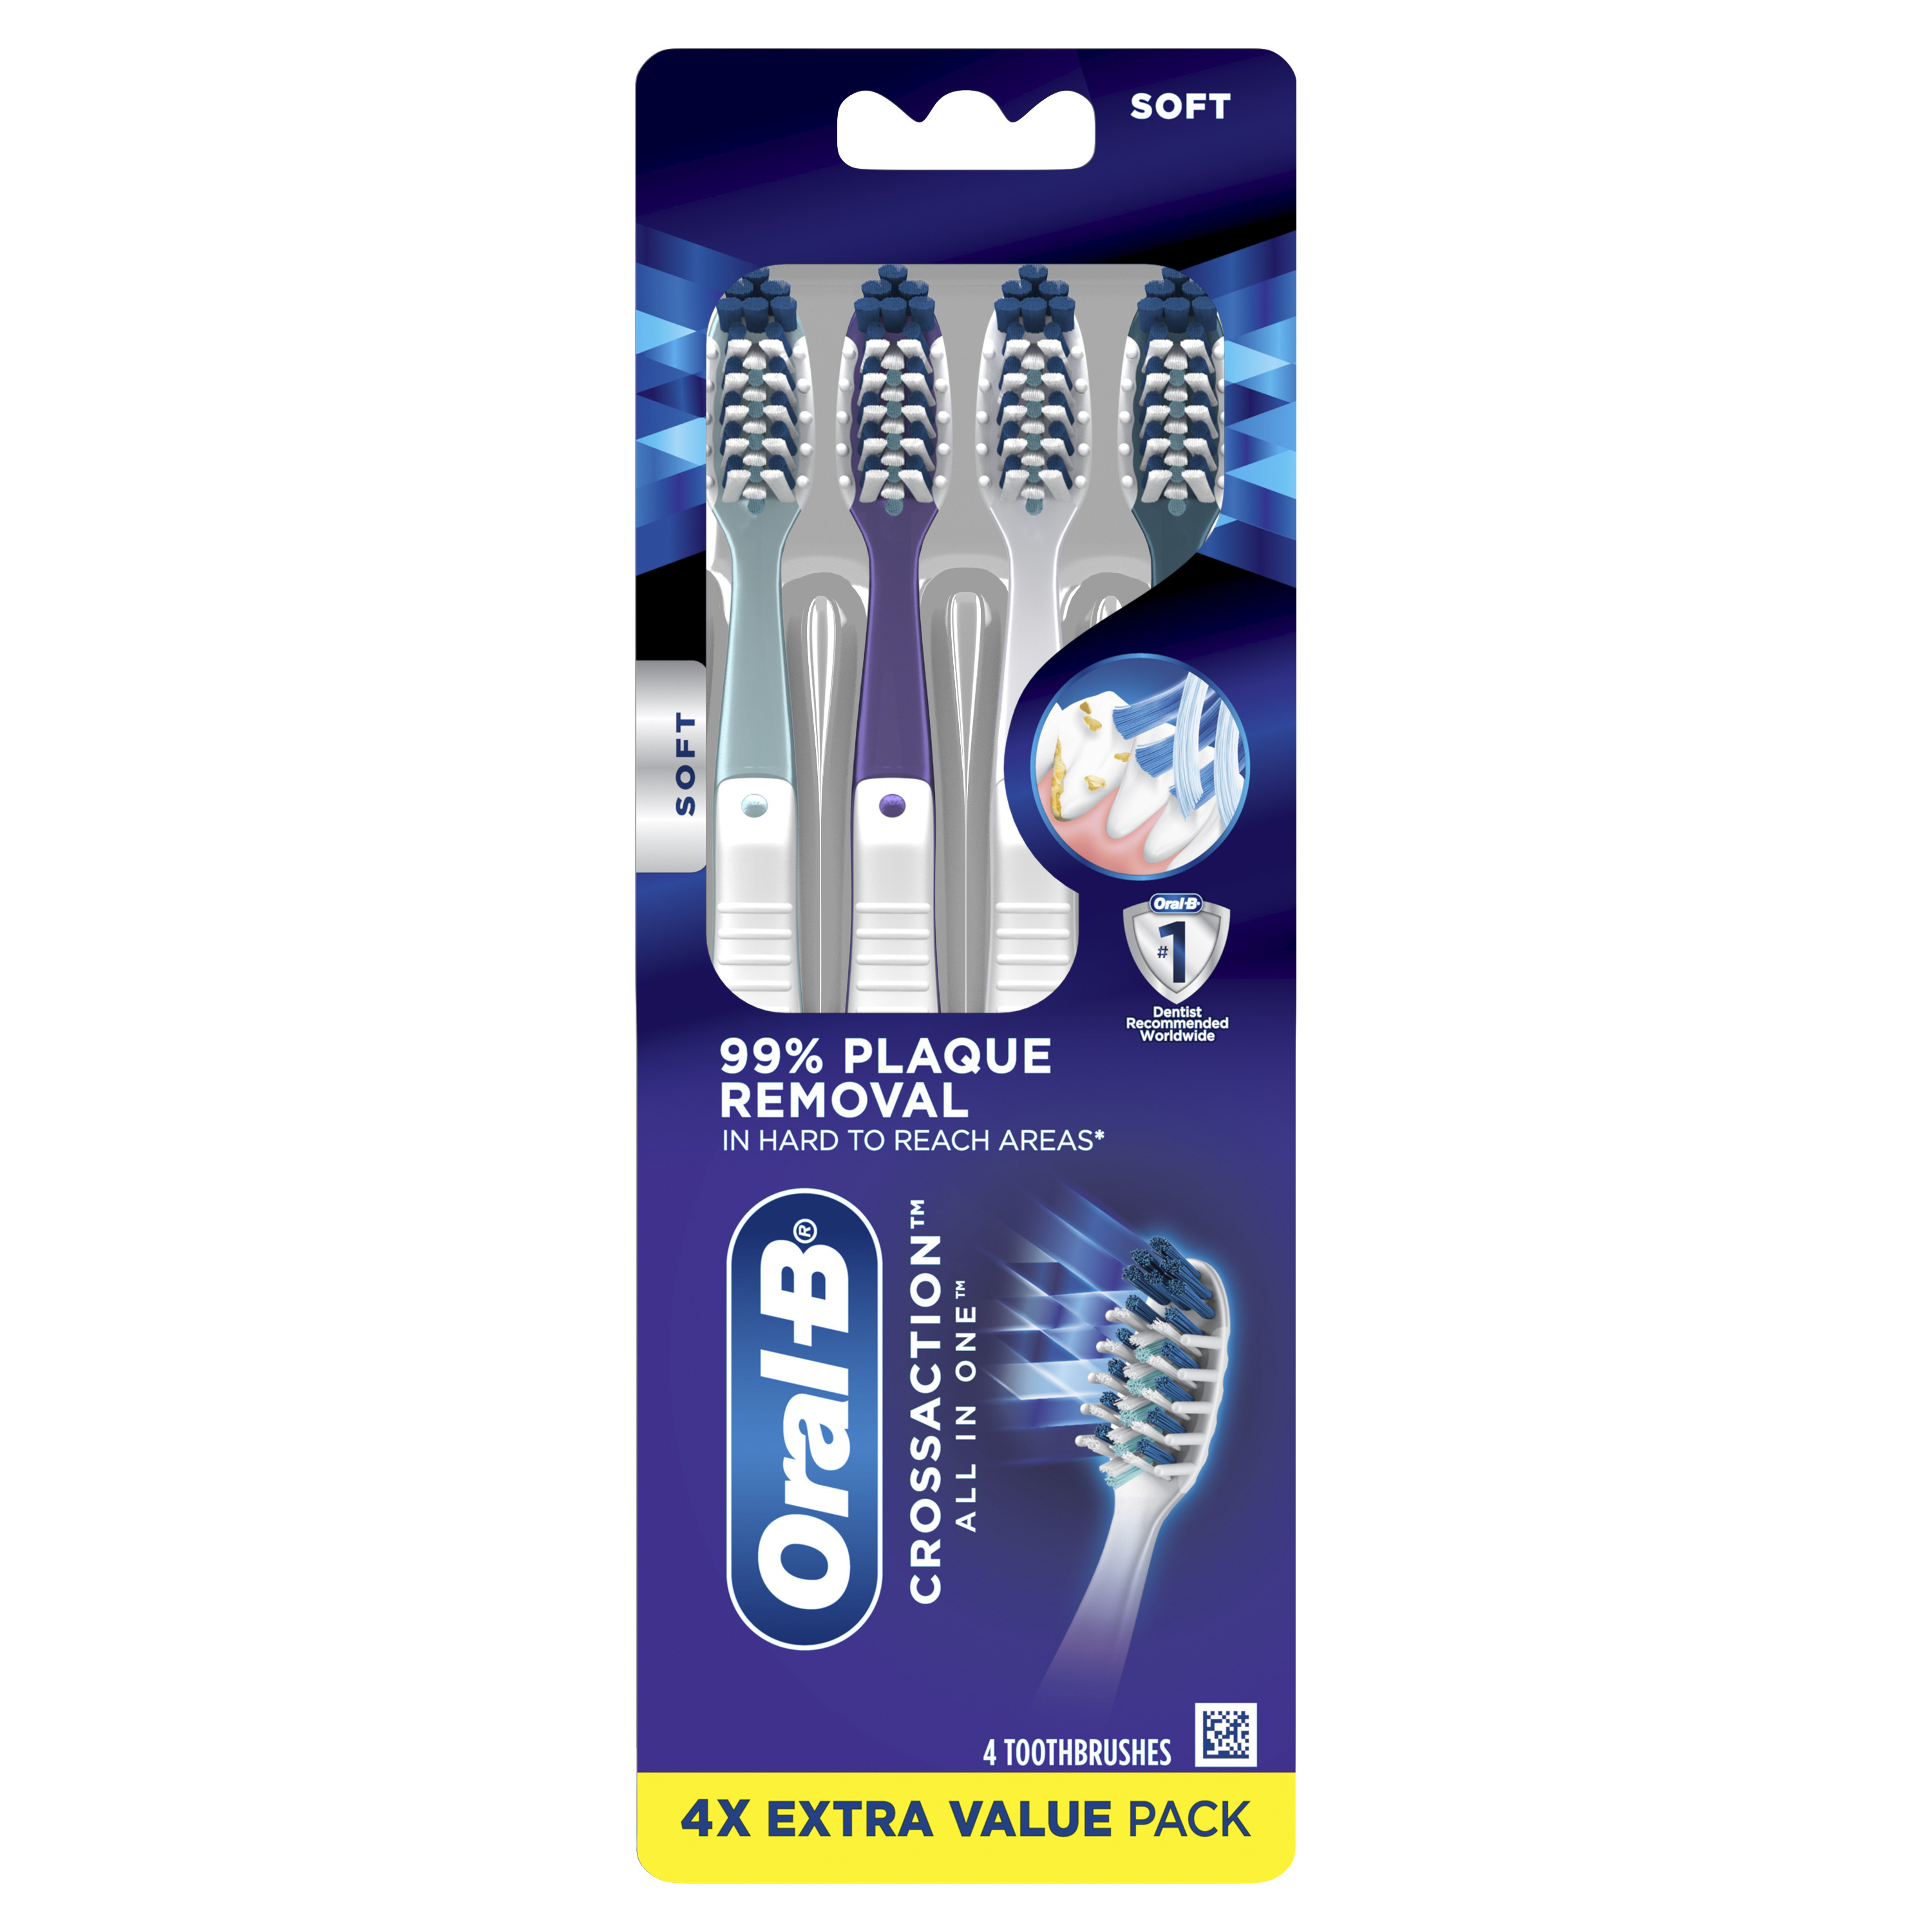 Oral-B CrossAction All in One Toothbrush, Deep Plaque Removal, Soft, 4 Ct - image 1 of 11